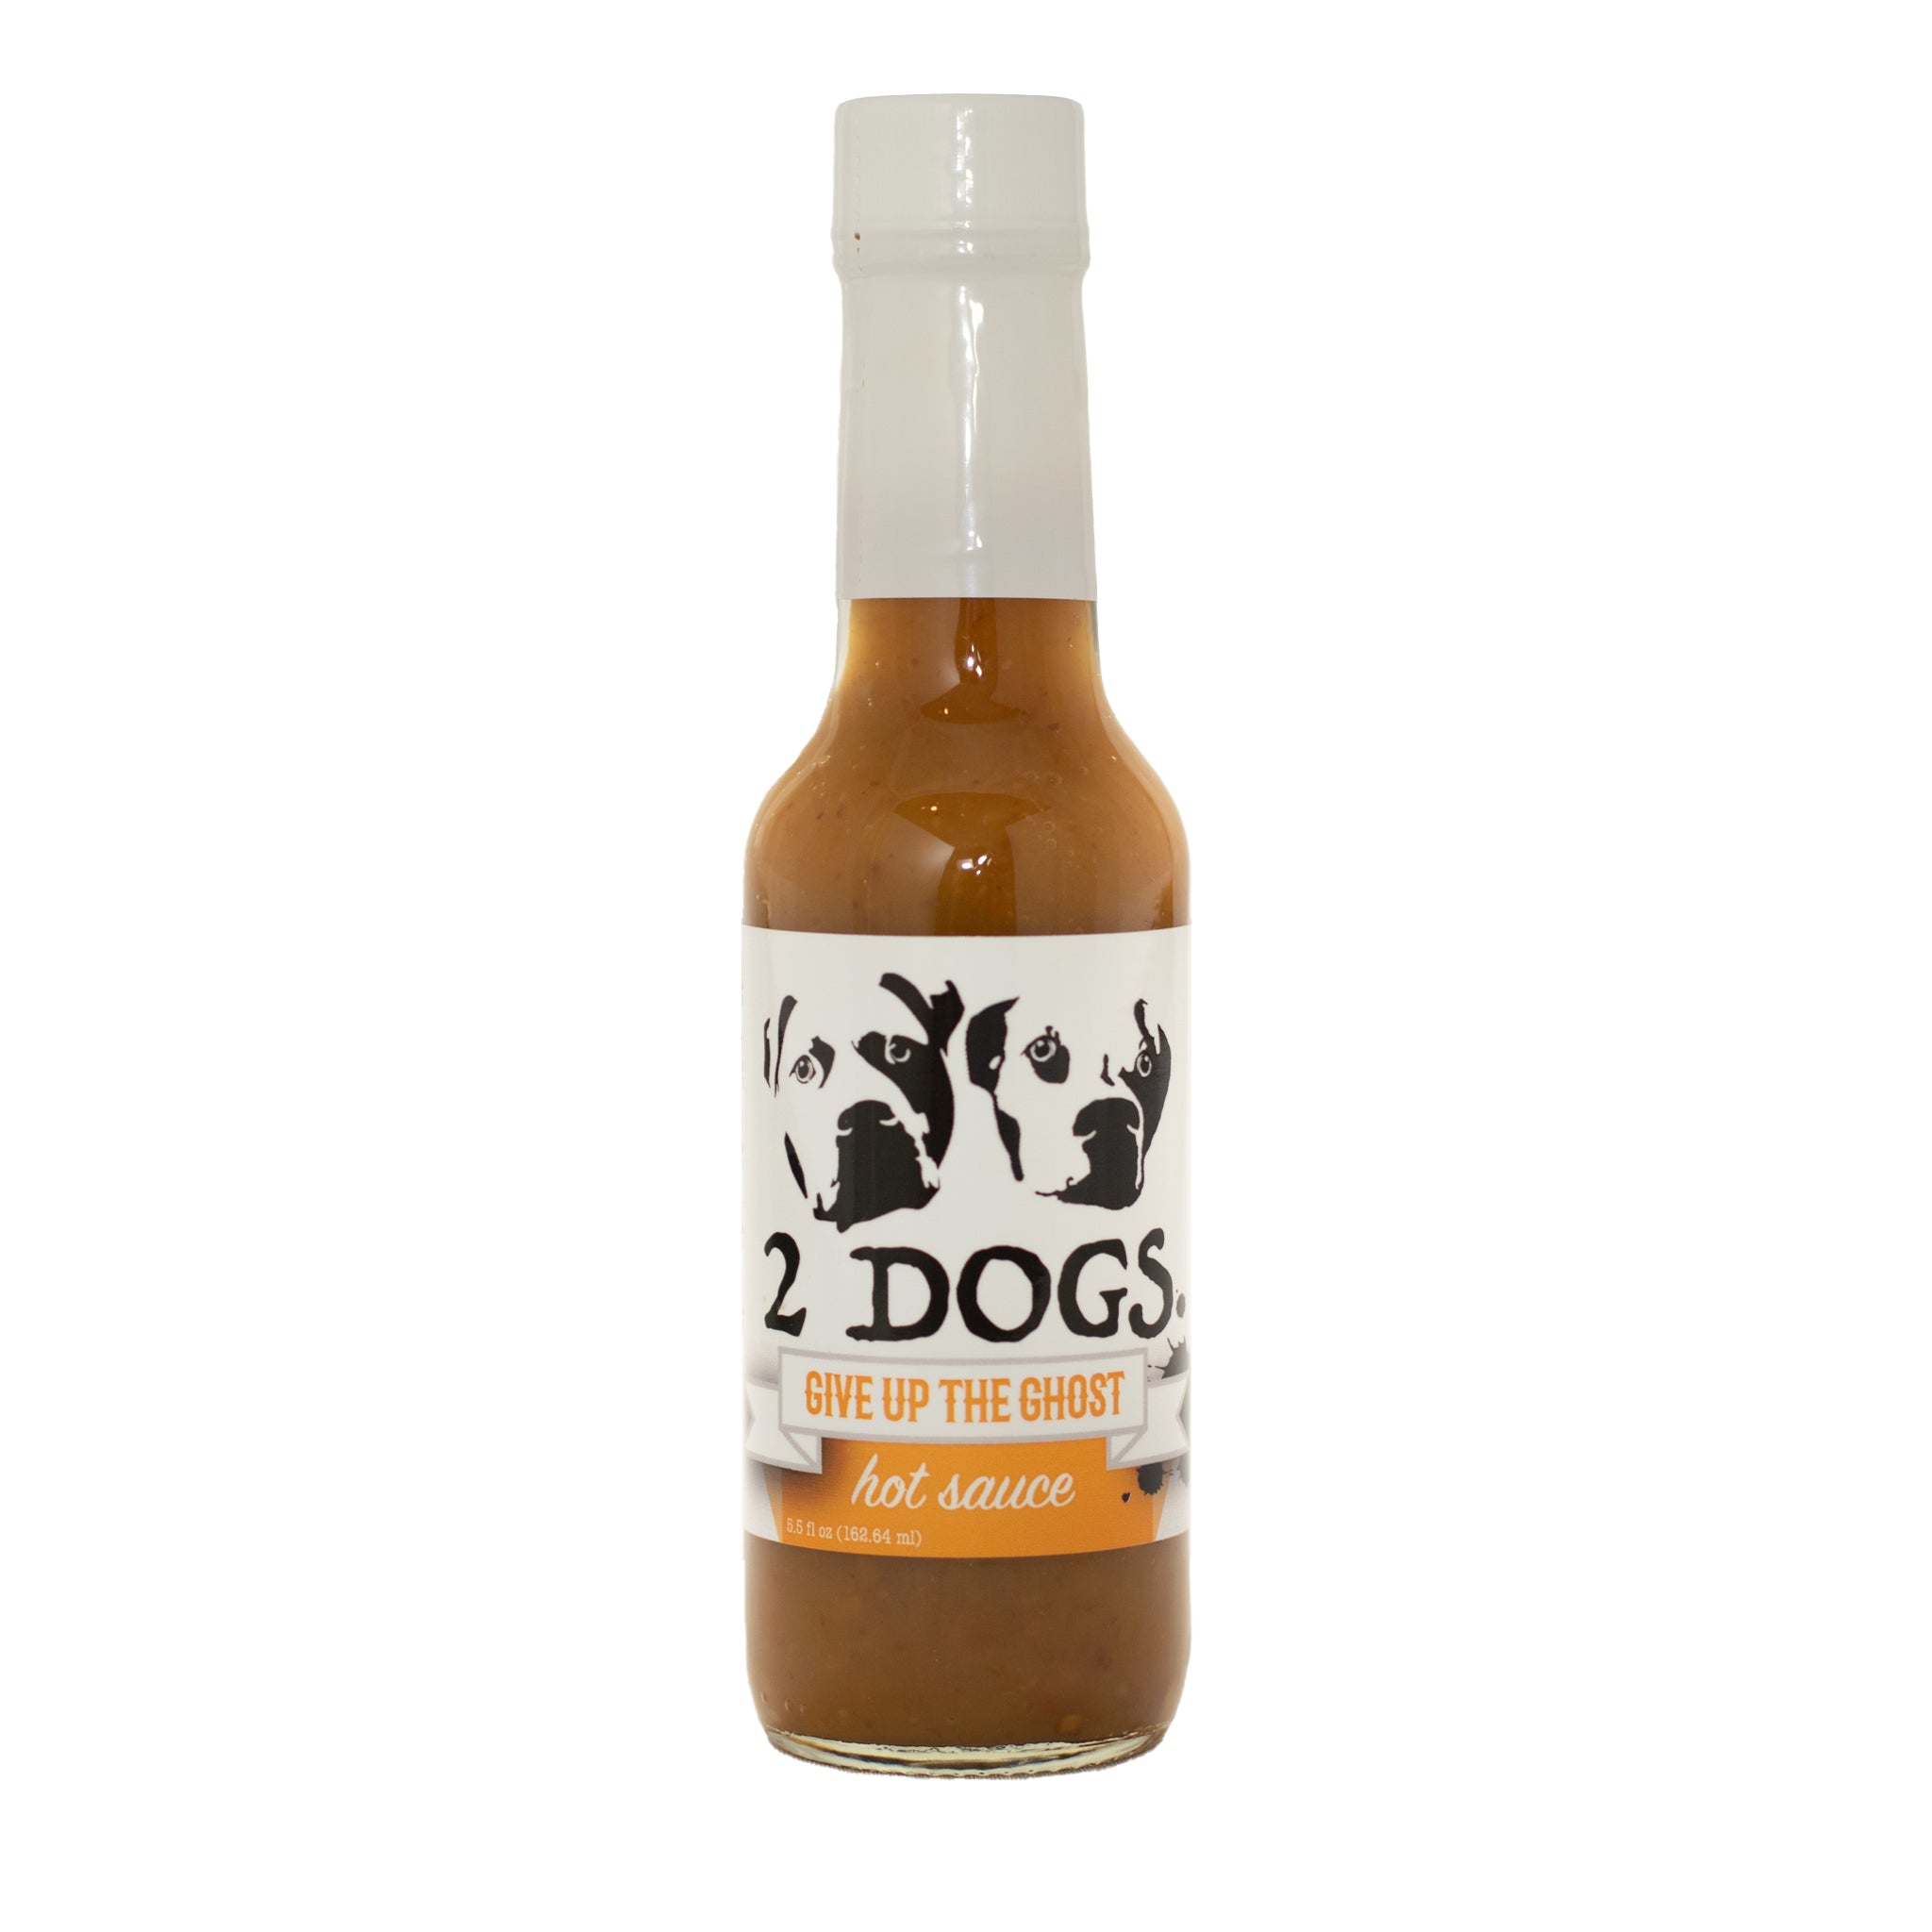 is hot sauce good for dogs